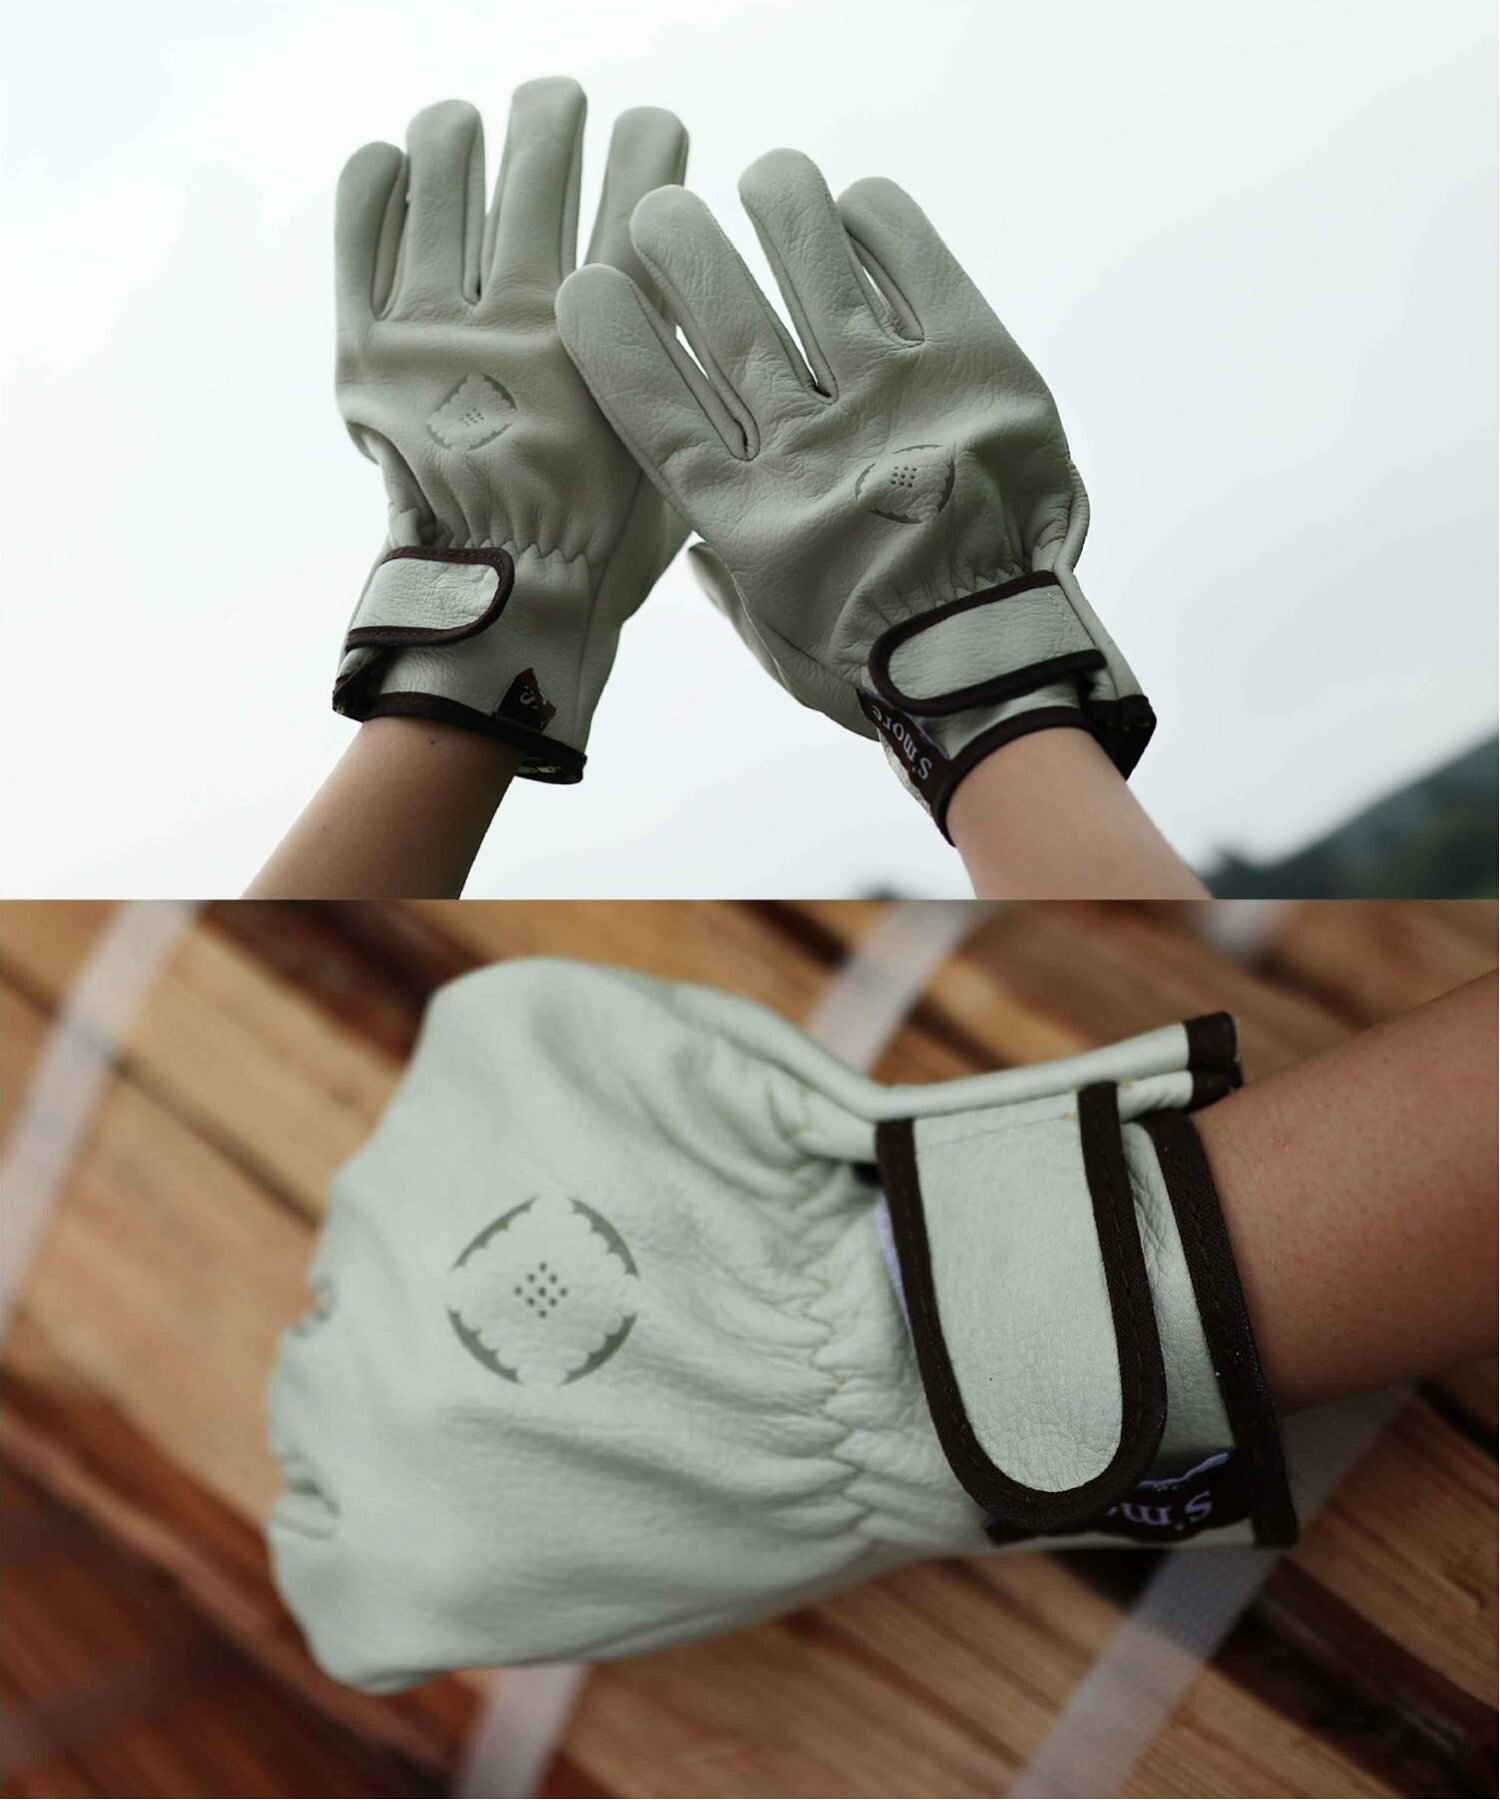 S'more/(U)【 Leather gloves 】耐火グローブ 耐熱グローブ